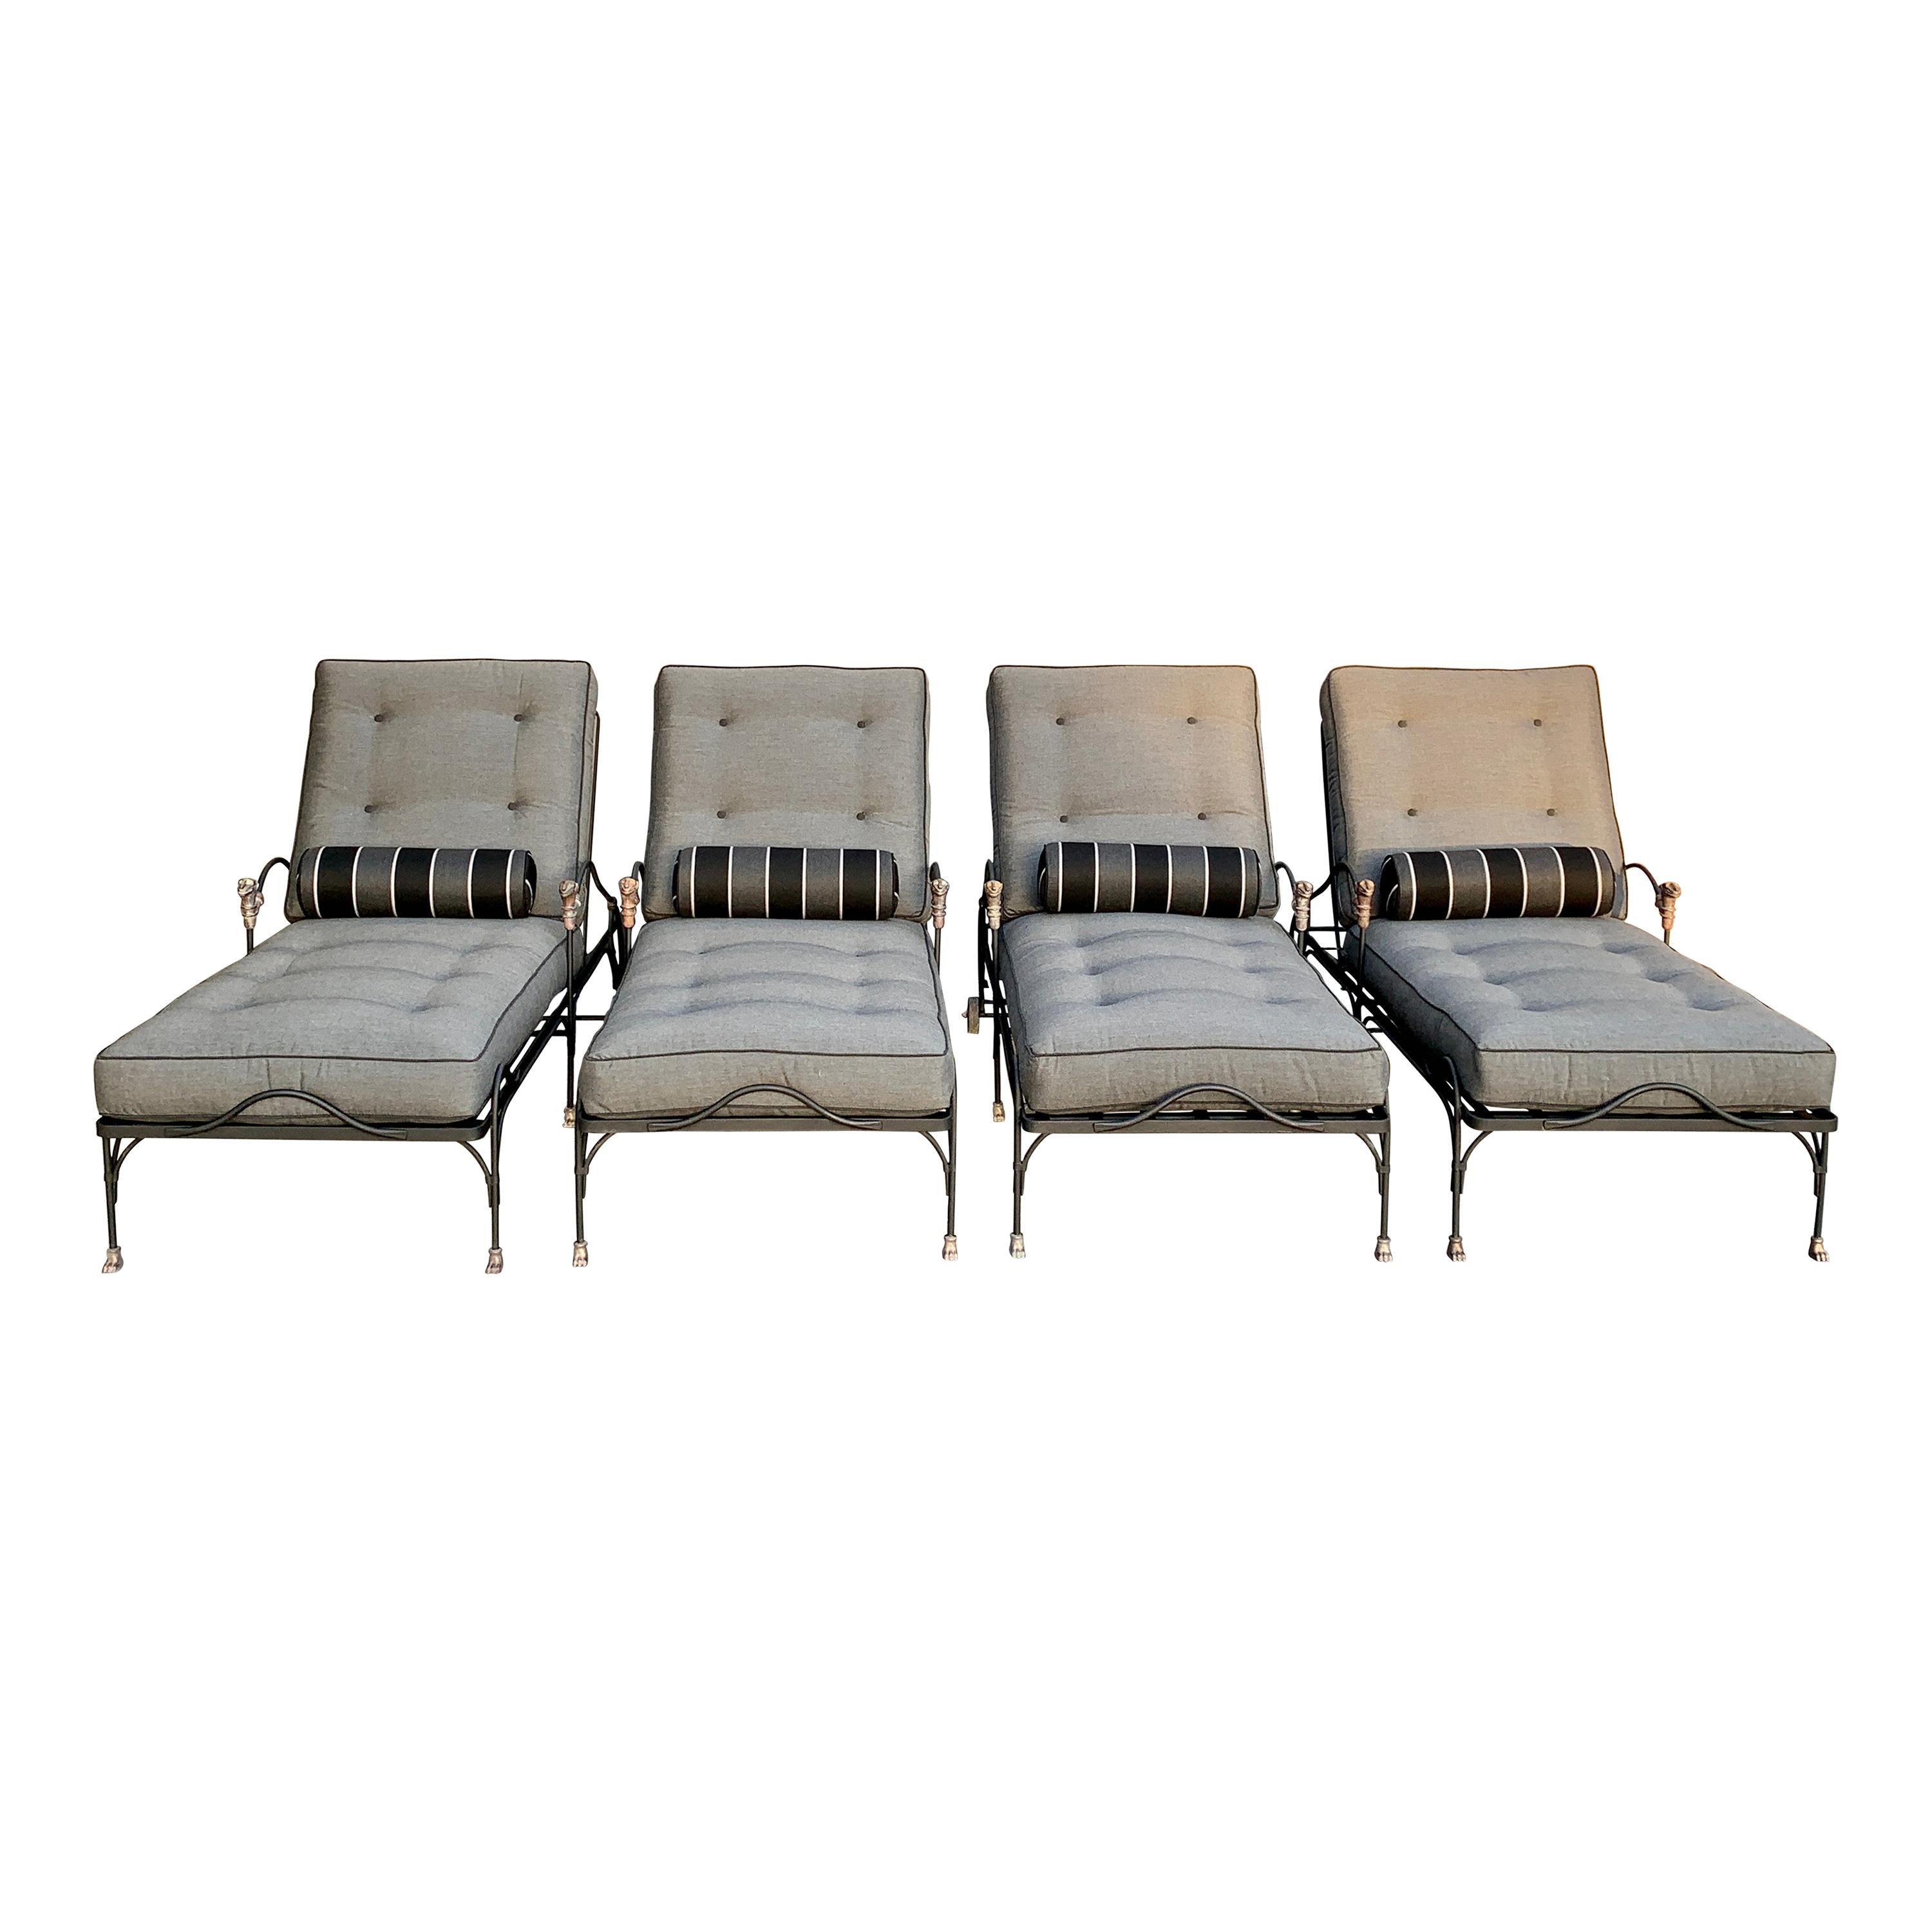 Four Wrought Iron Chaises with Bronze Details in the Style of Giacometti